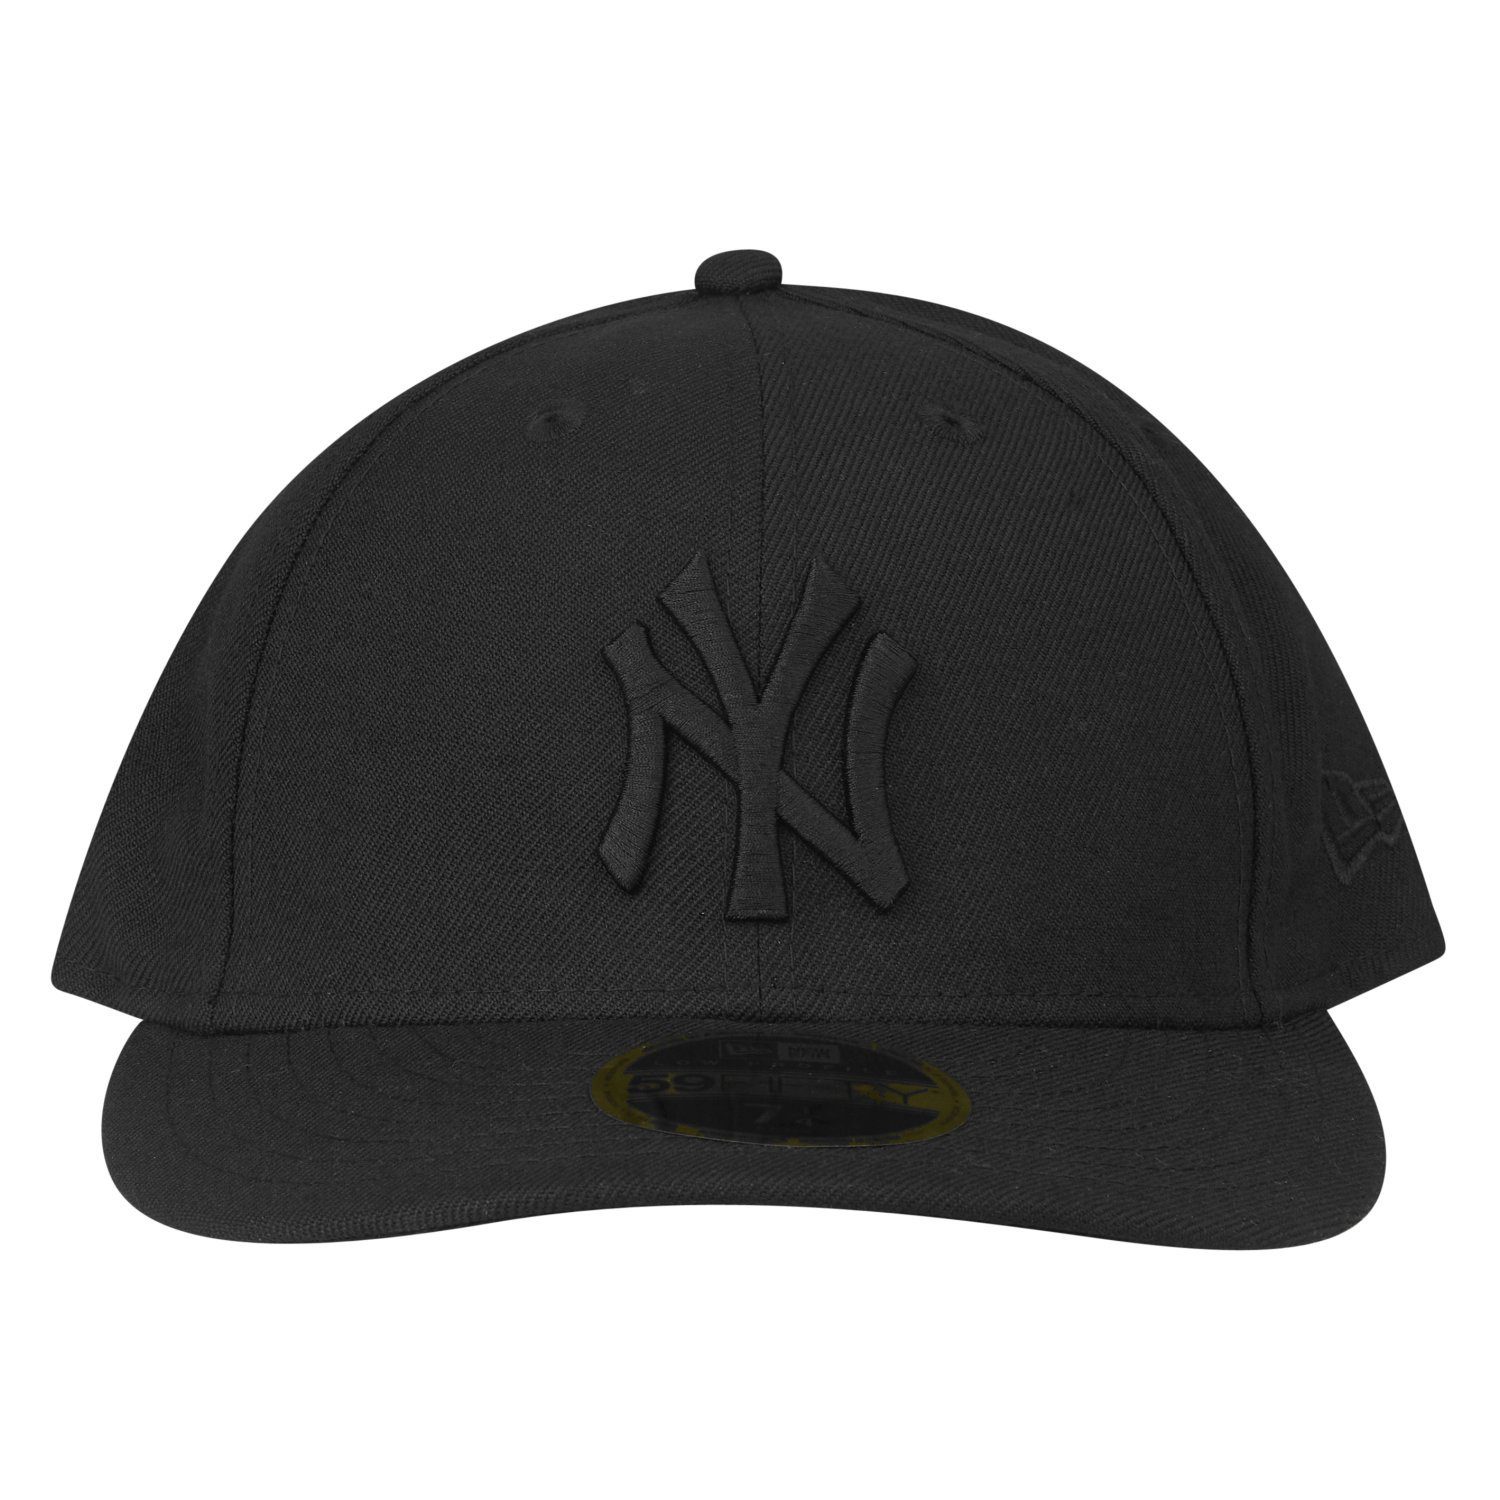 New Era York Low Yankees New Cap 59Fifty Profile Fitted